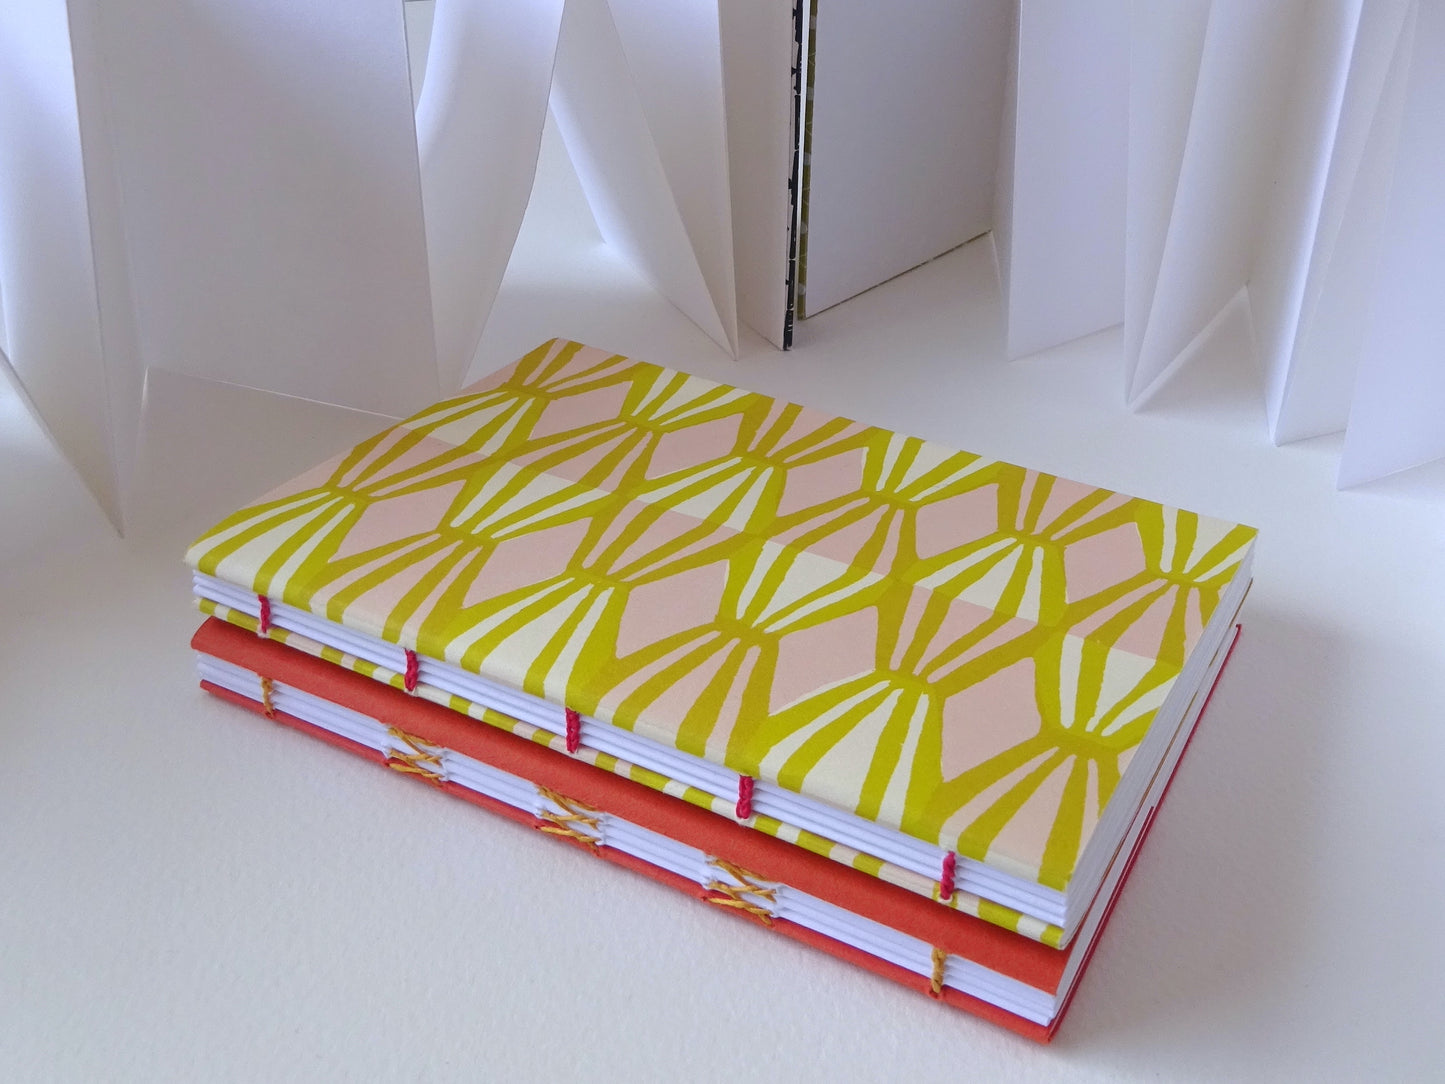 Handmade books link stitched bindings and quirky accordions